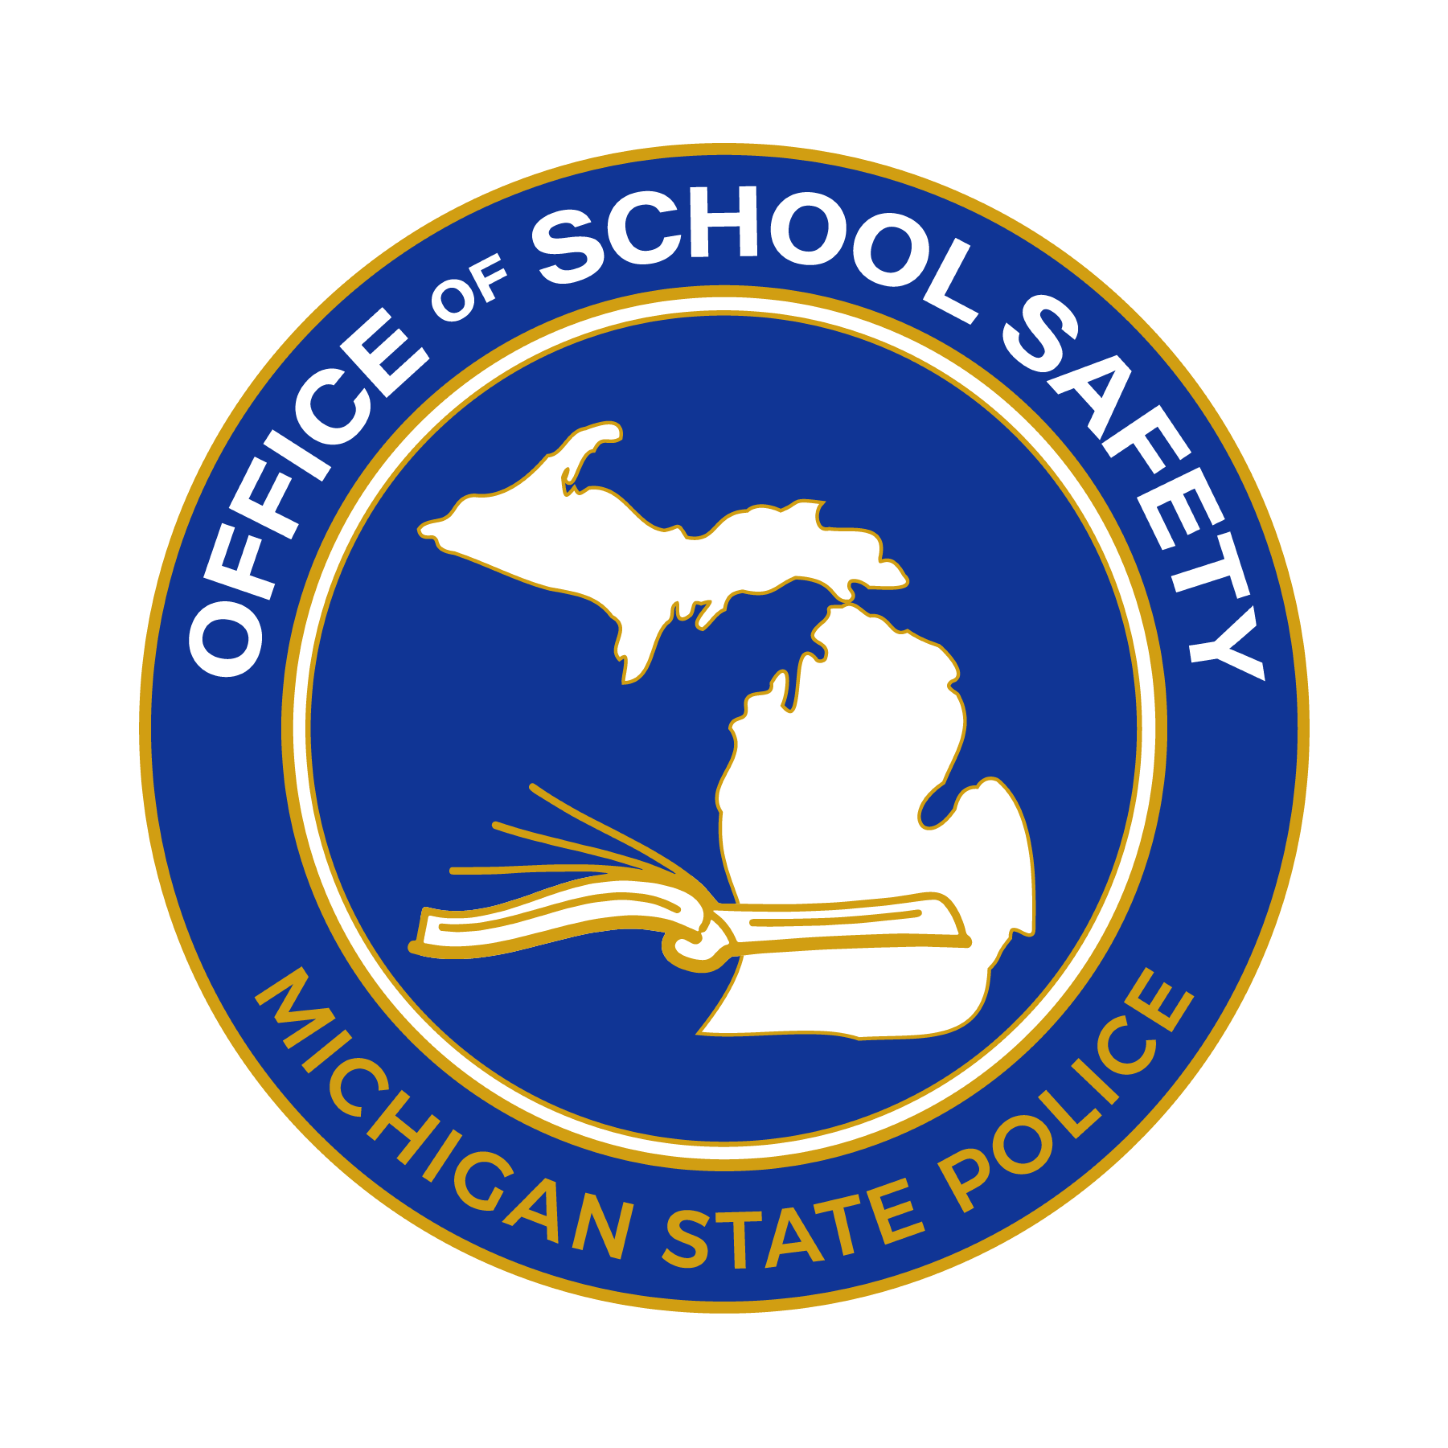 Michigan State Police Office of School Safety